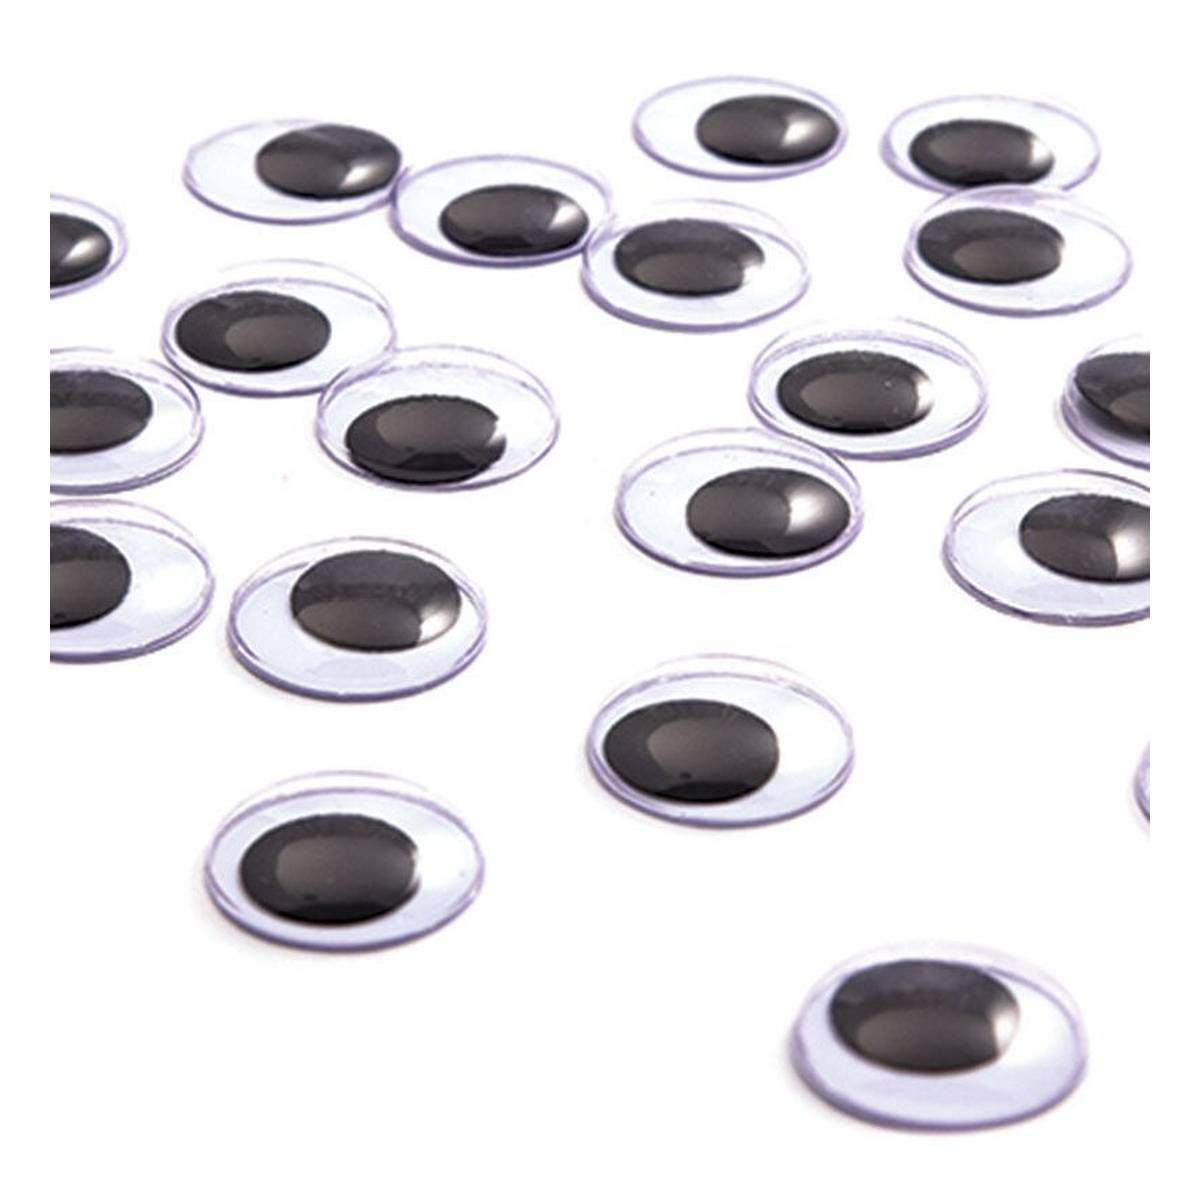 Googly Eyes: Making Funny Faces [With 48 Pairs of Self-Adhesive Googly Eyes]